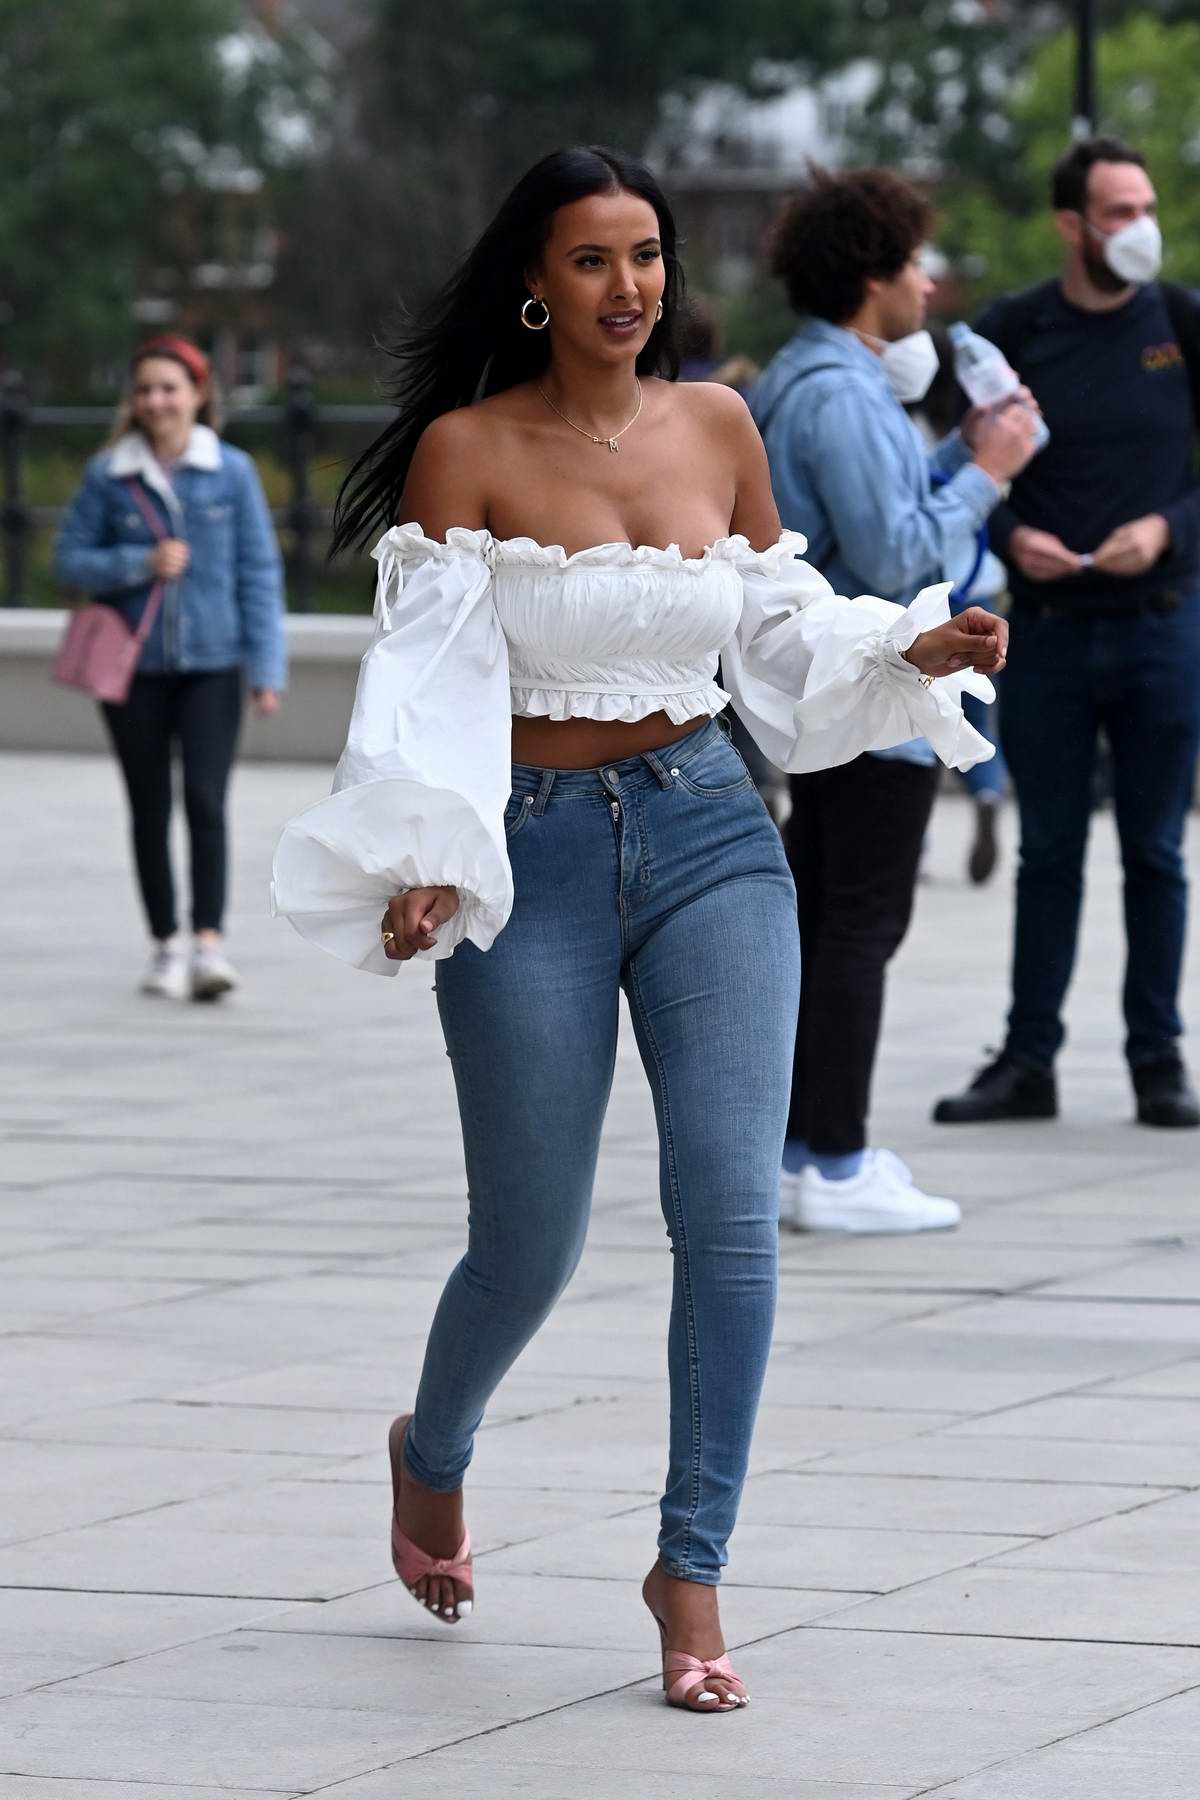 Maya Jama looks stunning in a white crop top and tight jeans as